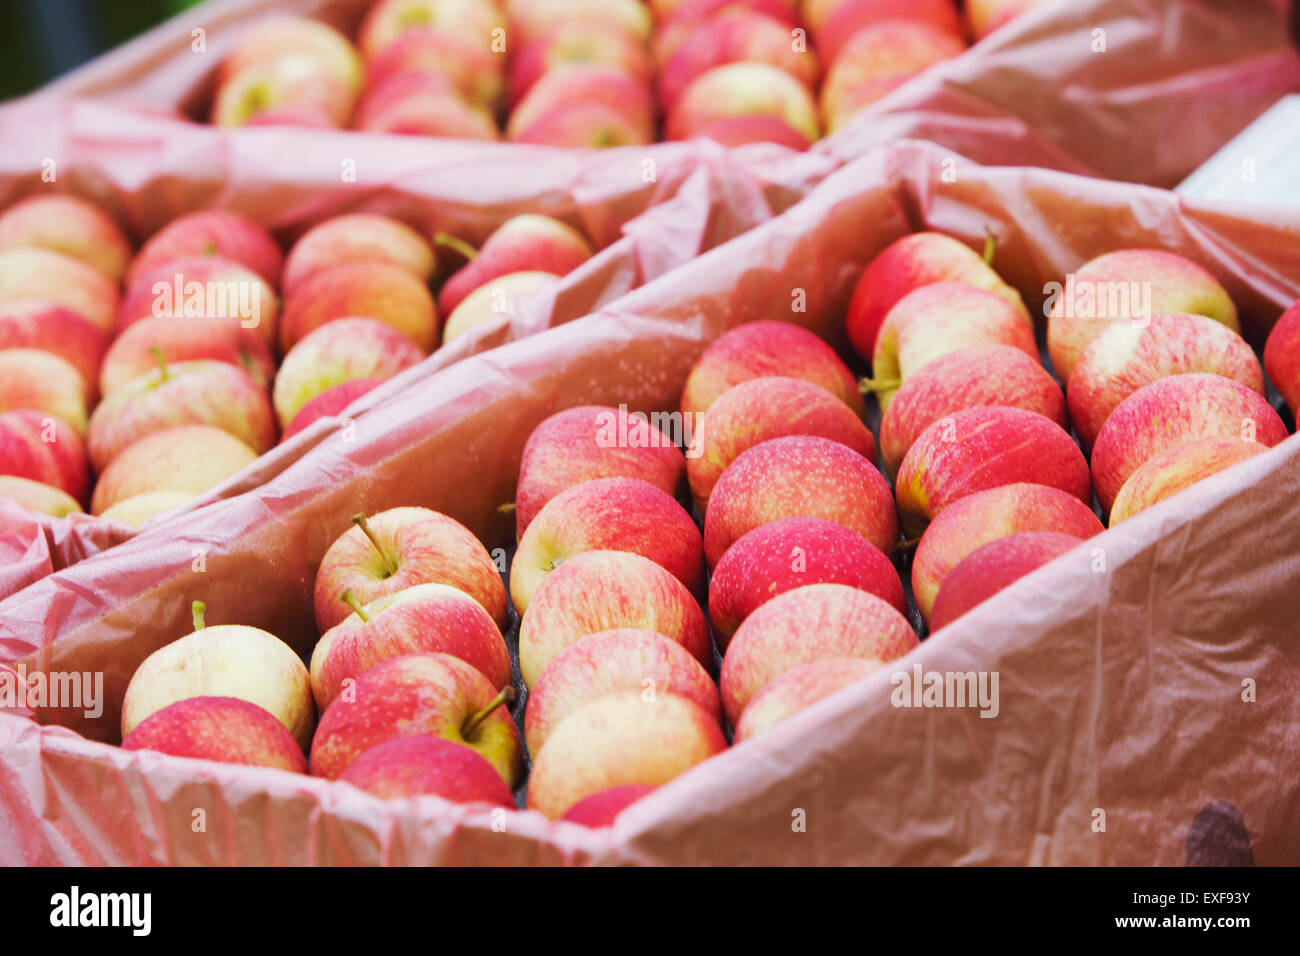 Apple display at grocers Stock Photo